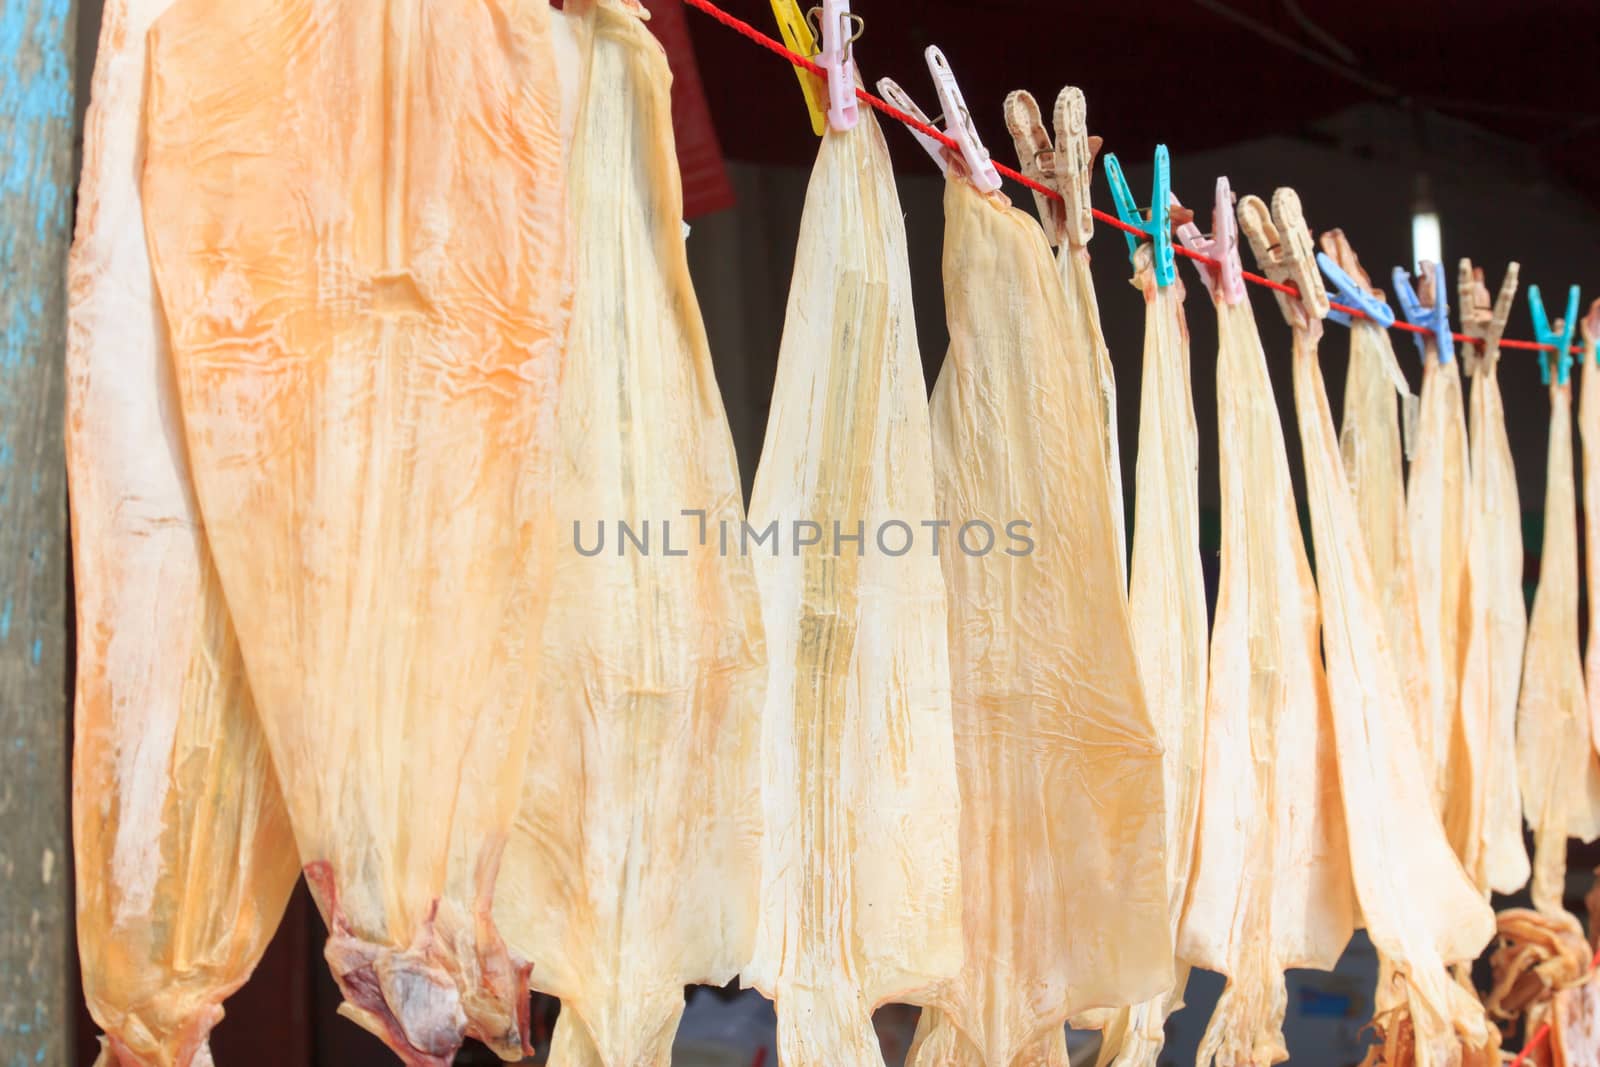 Dried squid is hanging aligned direct sunlight.